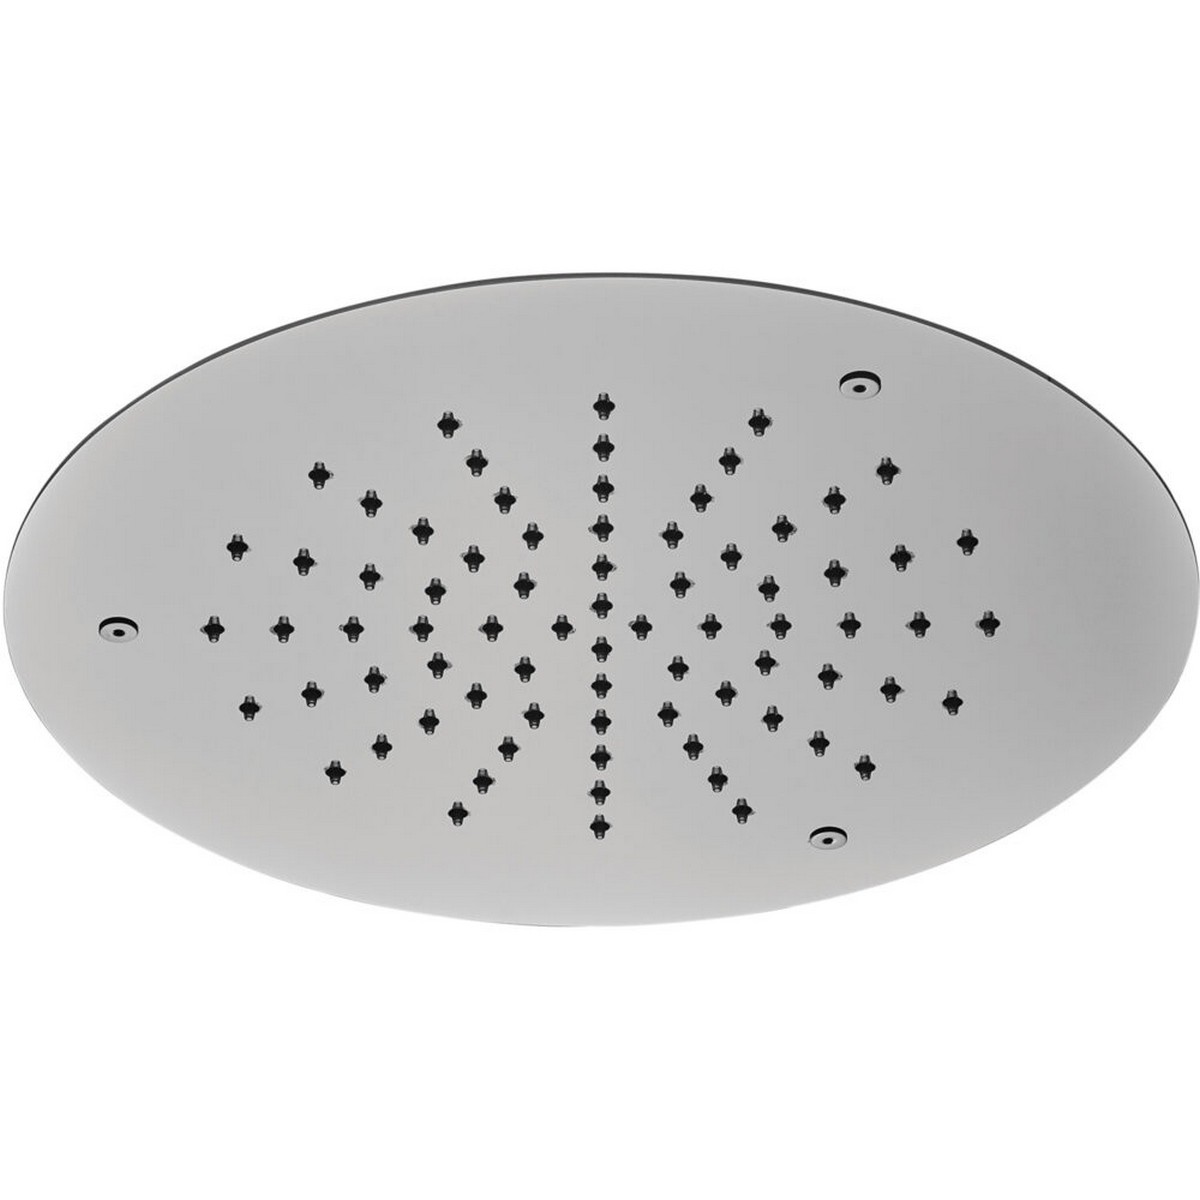 RAIN THERAPY PS ZI-63020 12 INCH ROUND CEILING SURFACE MOUNTED SHOWER HEAD